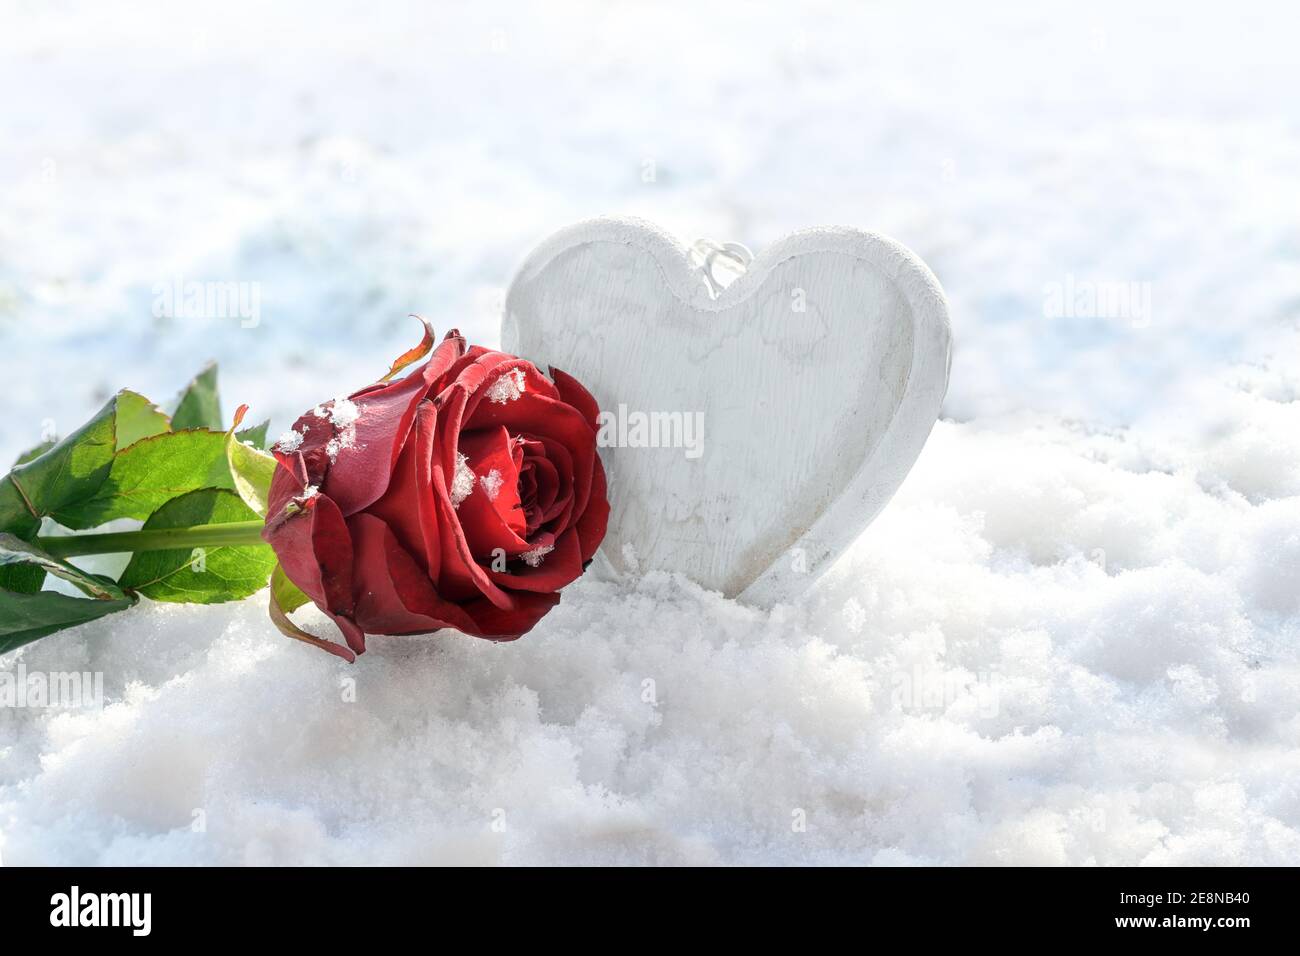 Red rose and a white painted wooden heart shape in the snow, love concept for seasonal holidays like valentines day, copy space, selected focus, narro Stock Photo